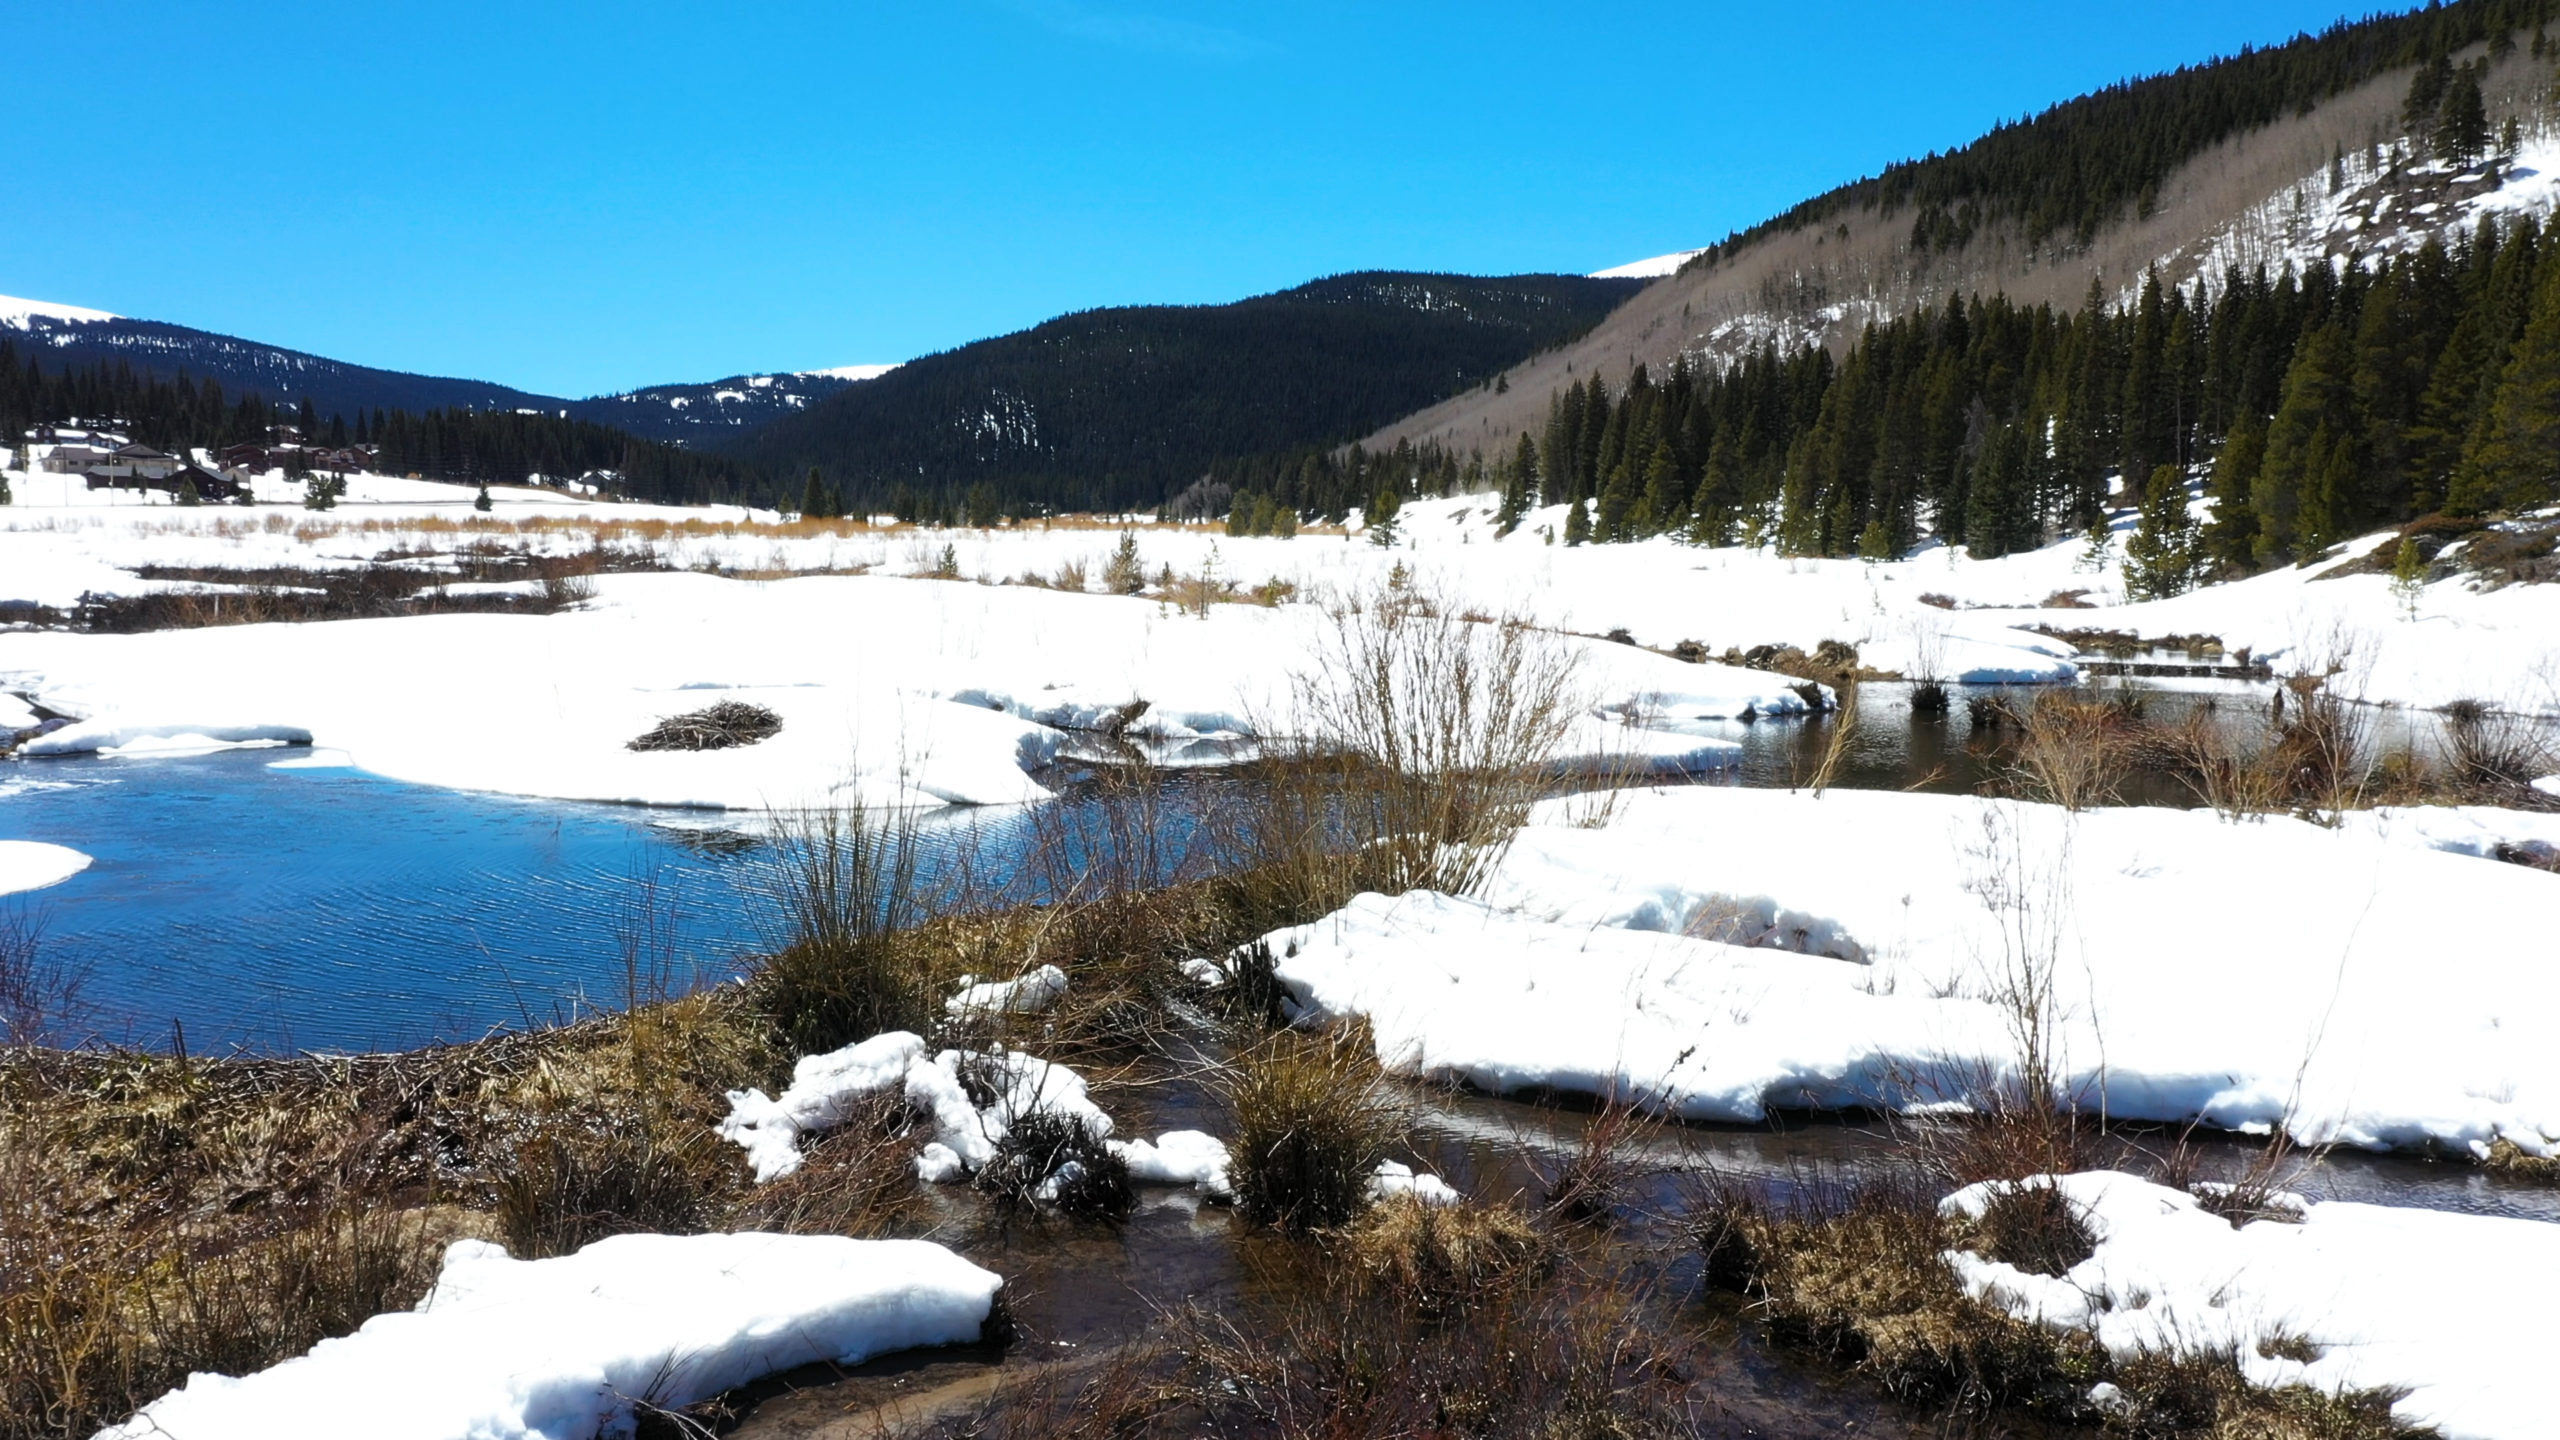 The Blue River starts in the mountains southwest of Breckenridge. Photo credit: Denver Water.